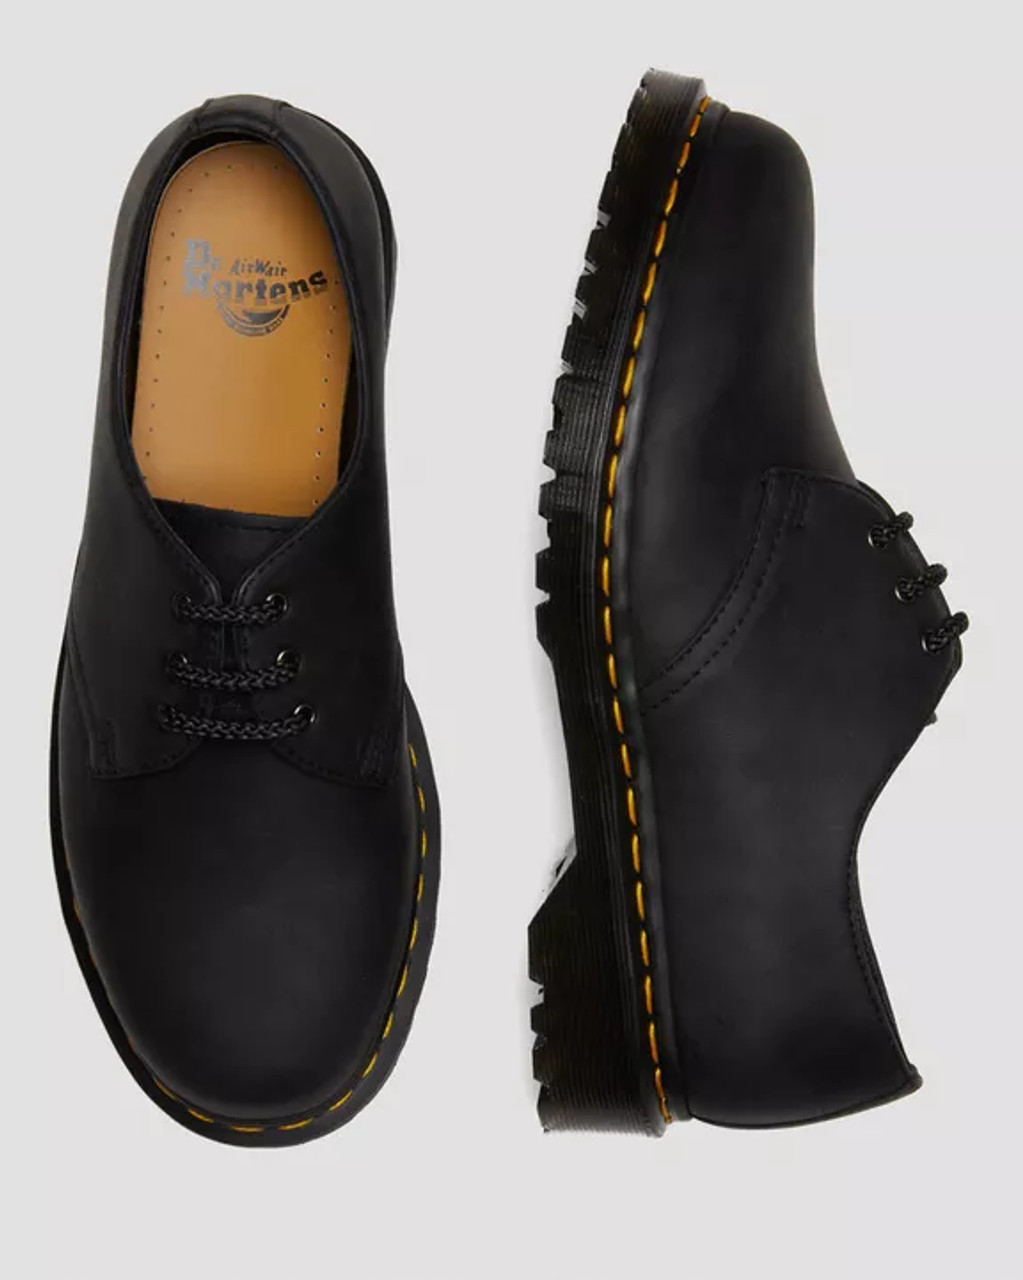 Dr. Martens 1461 Waxed Full Grain Leather Oxford Shoe - Herbert's Boots ...